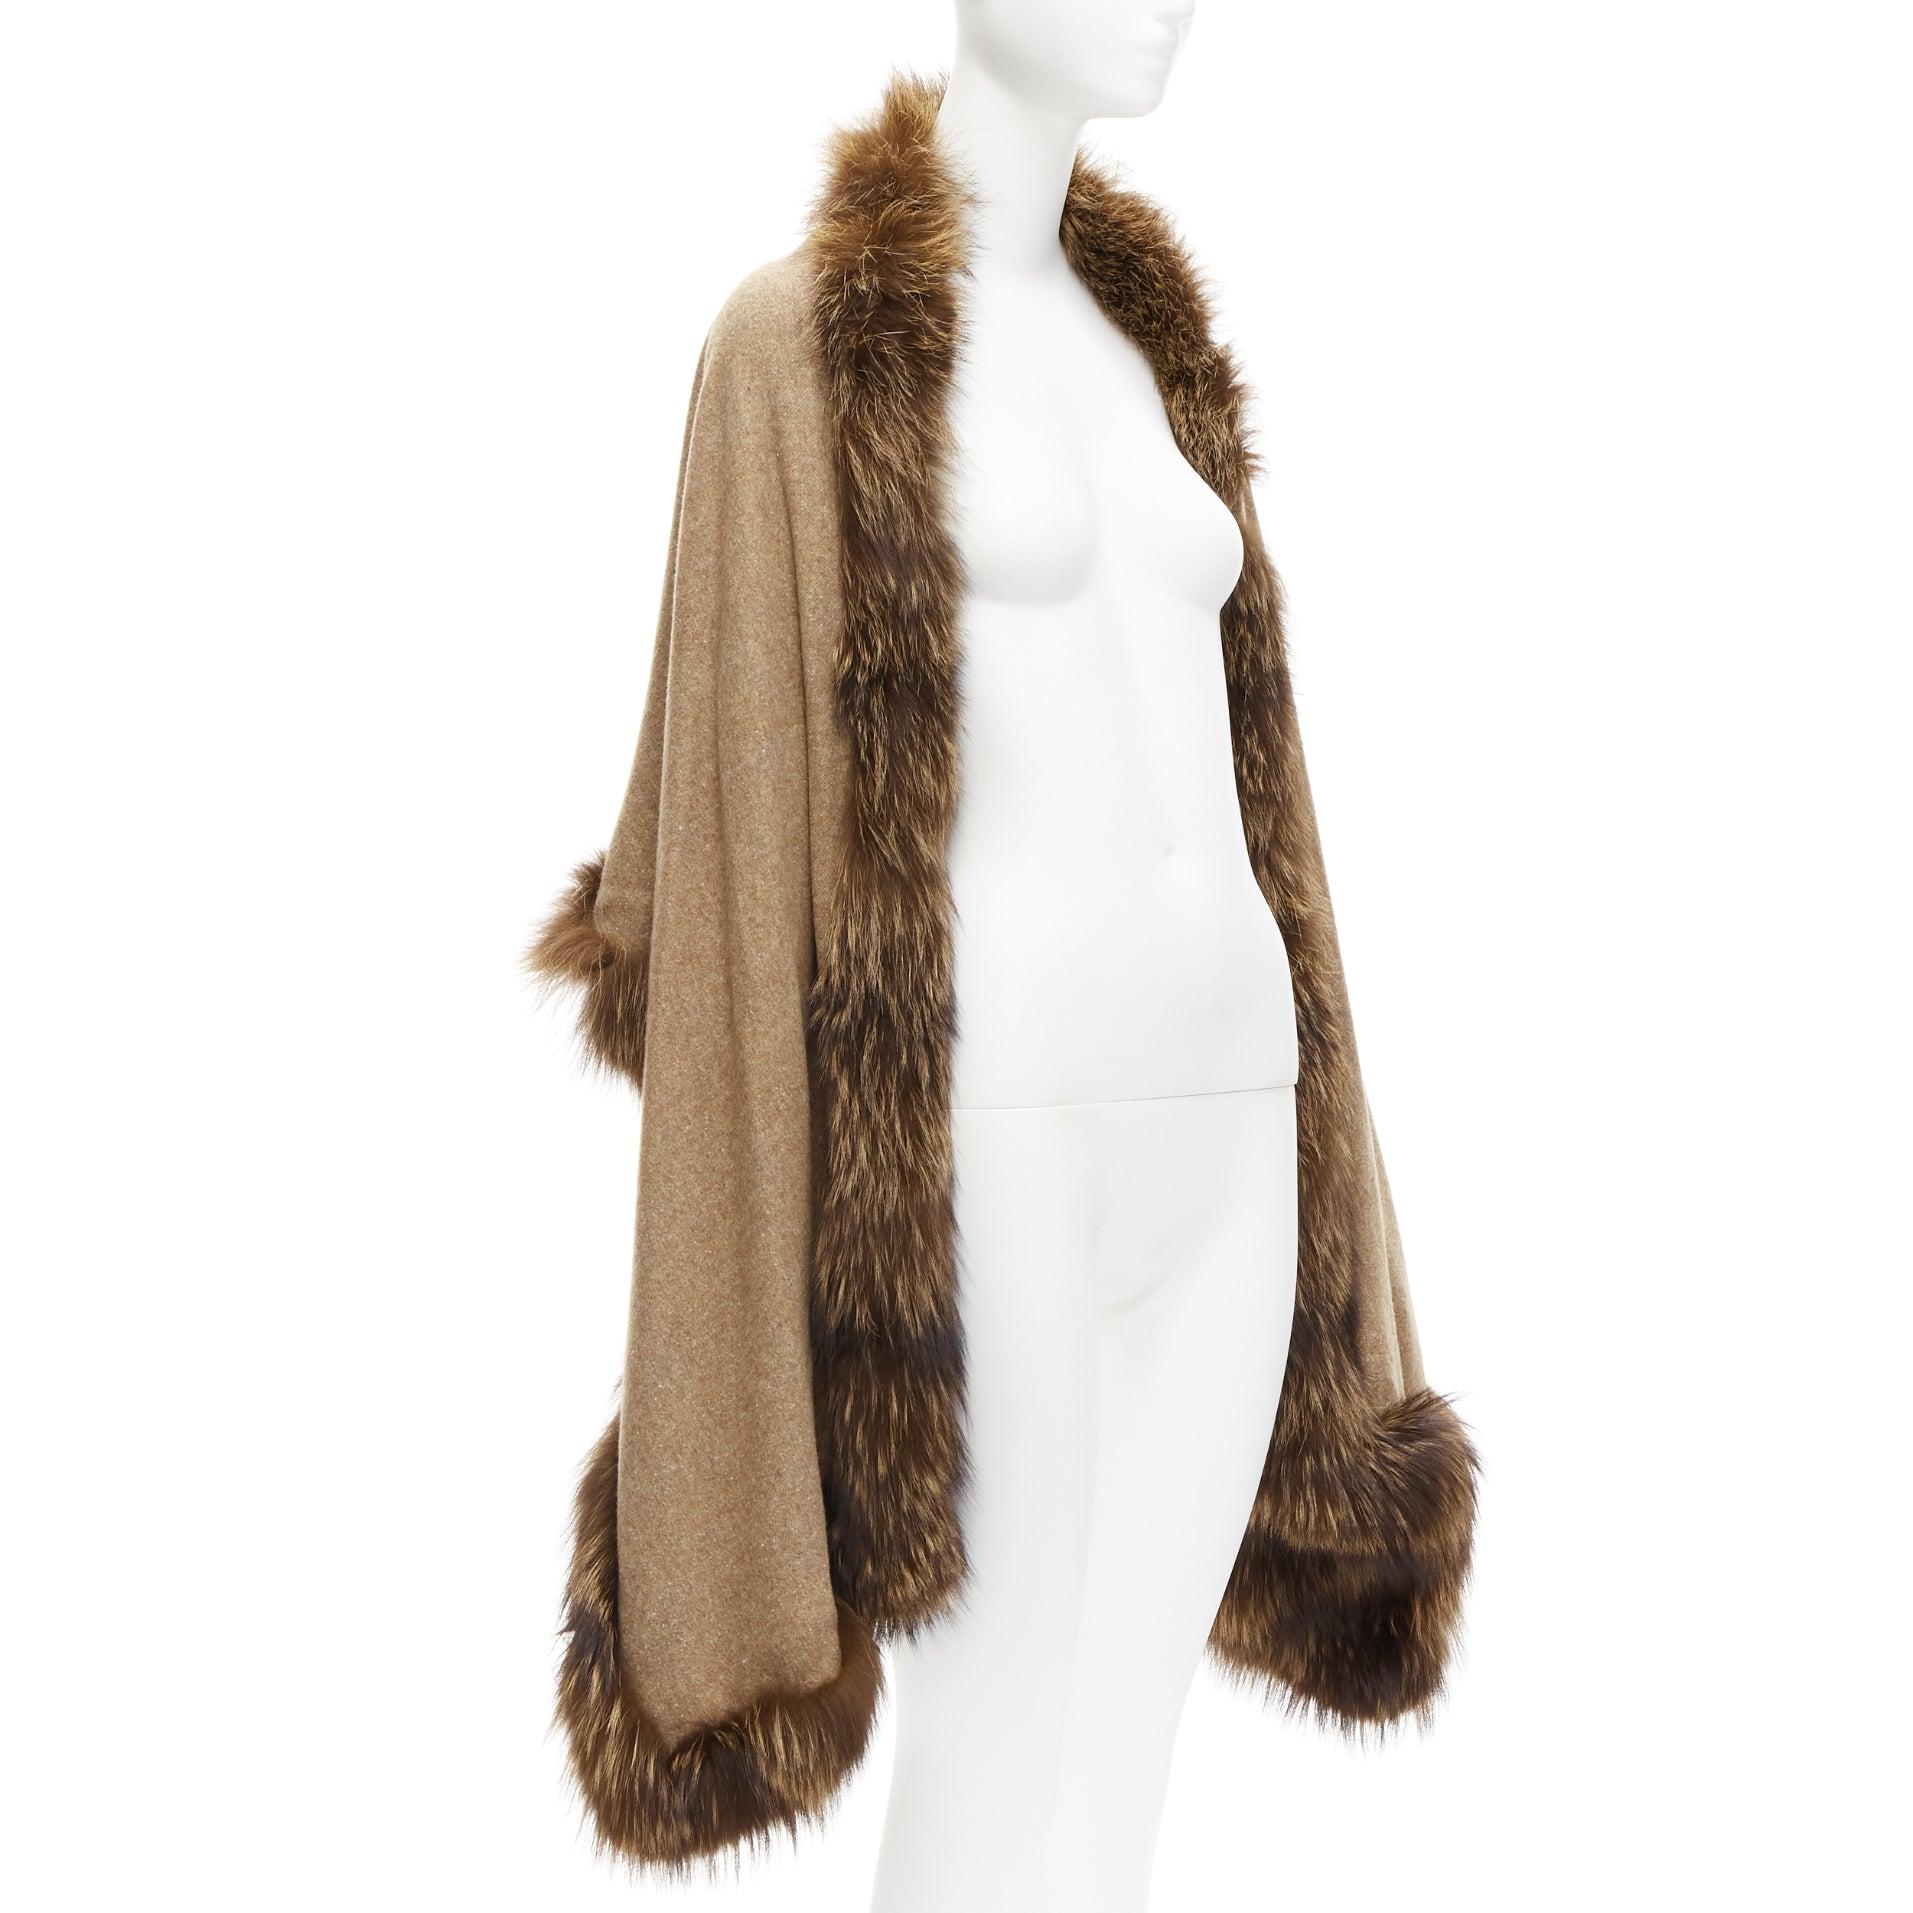 NO BRAND brown real fur trim soft wool rectangular shawl scarf
Reference: CELG/A00250
Brand: No Brand
Material: Fur, Fabric
Color: Brown
Pattern: Solid
Lining: Brown Fabric
Extra Details: Fur trimmed.

CONDITION:
Condition: Excellent, this item was